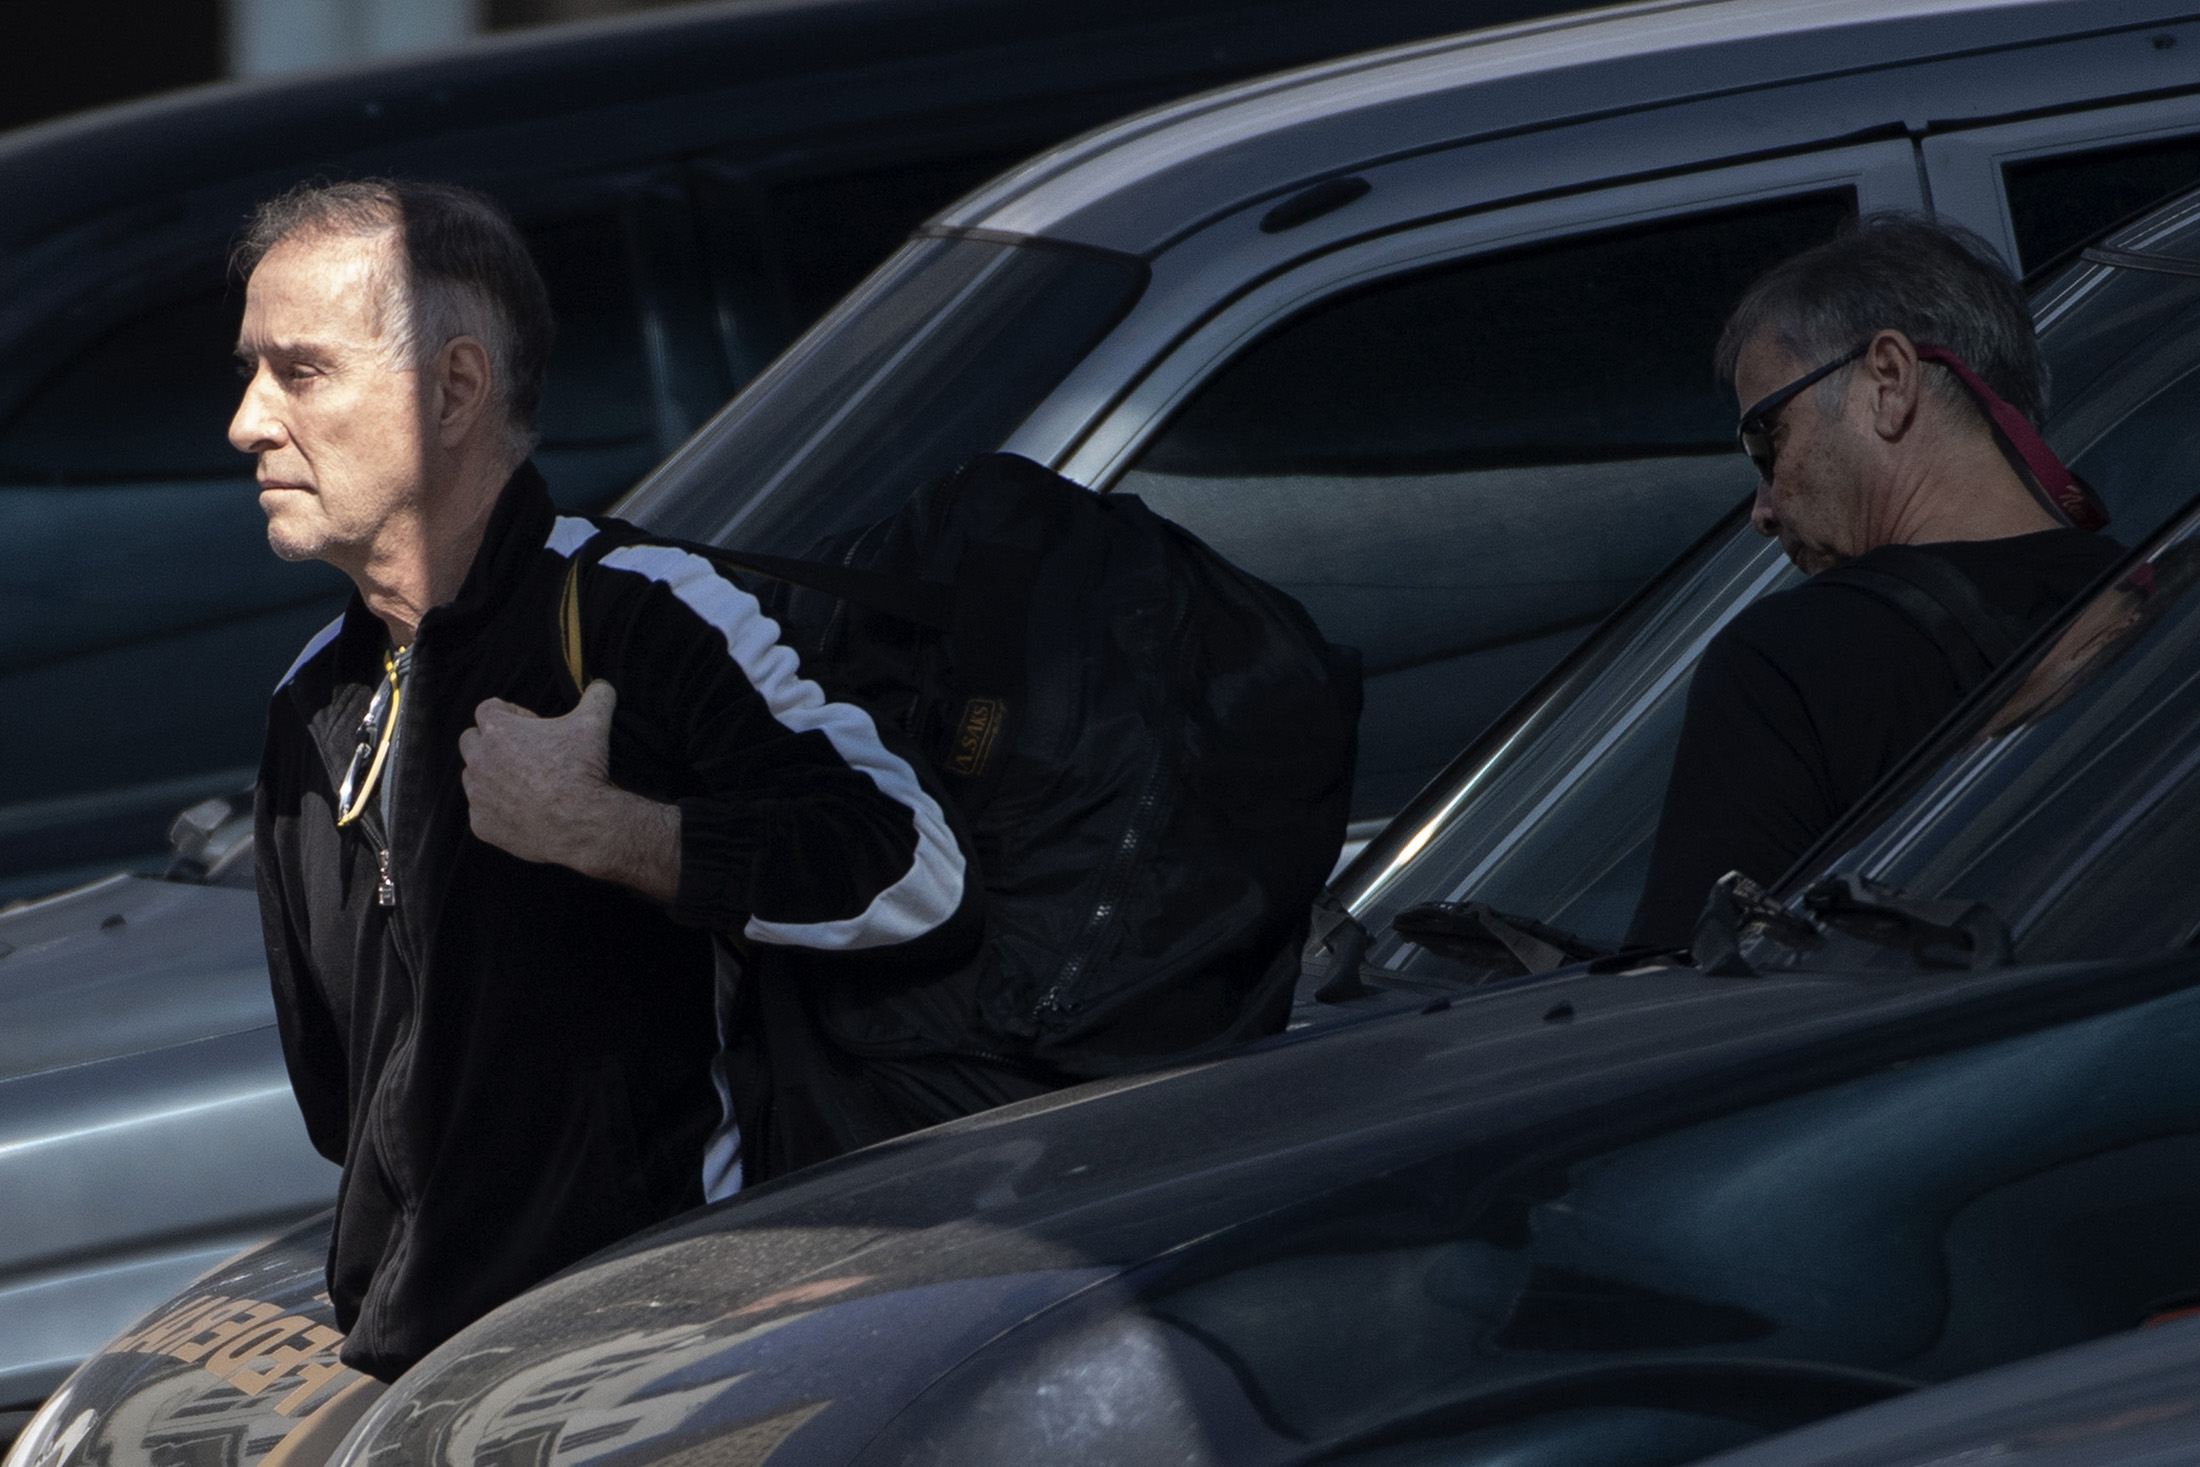 Eike Batista, left, arrives at the Federal Police headquarters on Aug. 8.